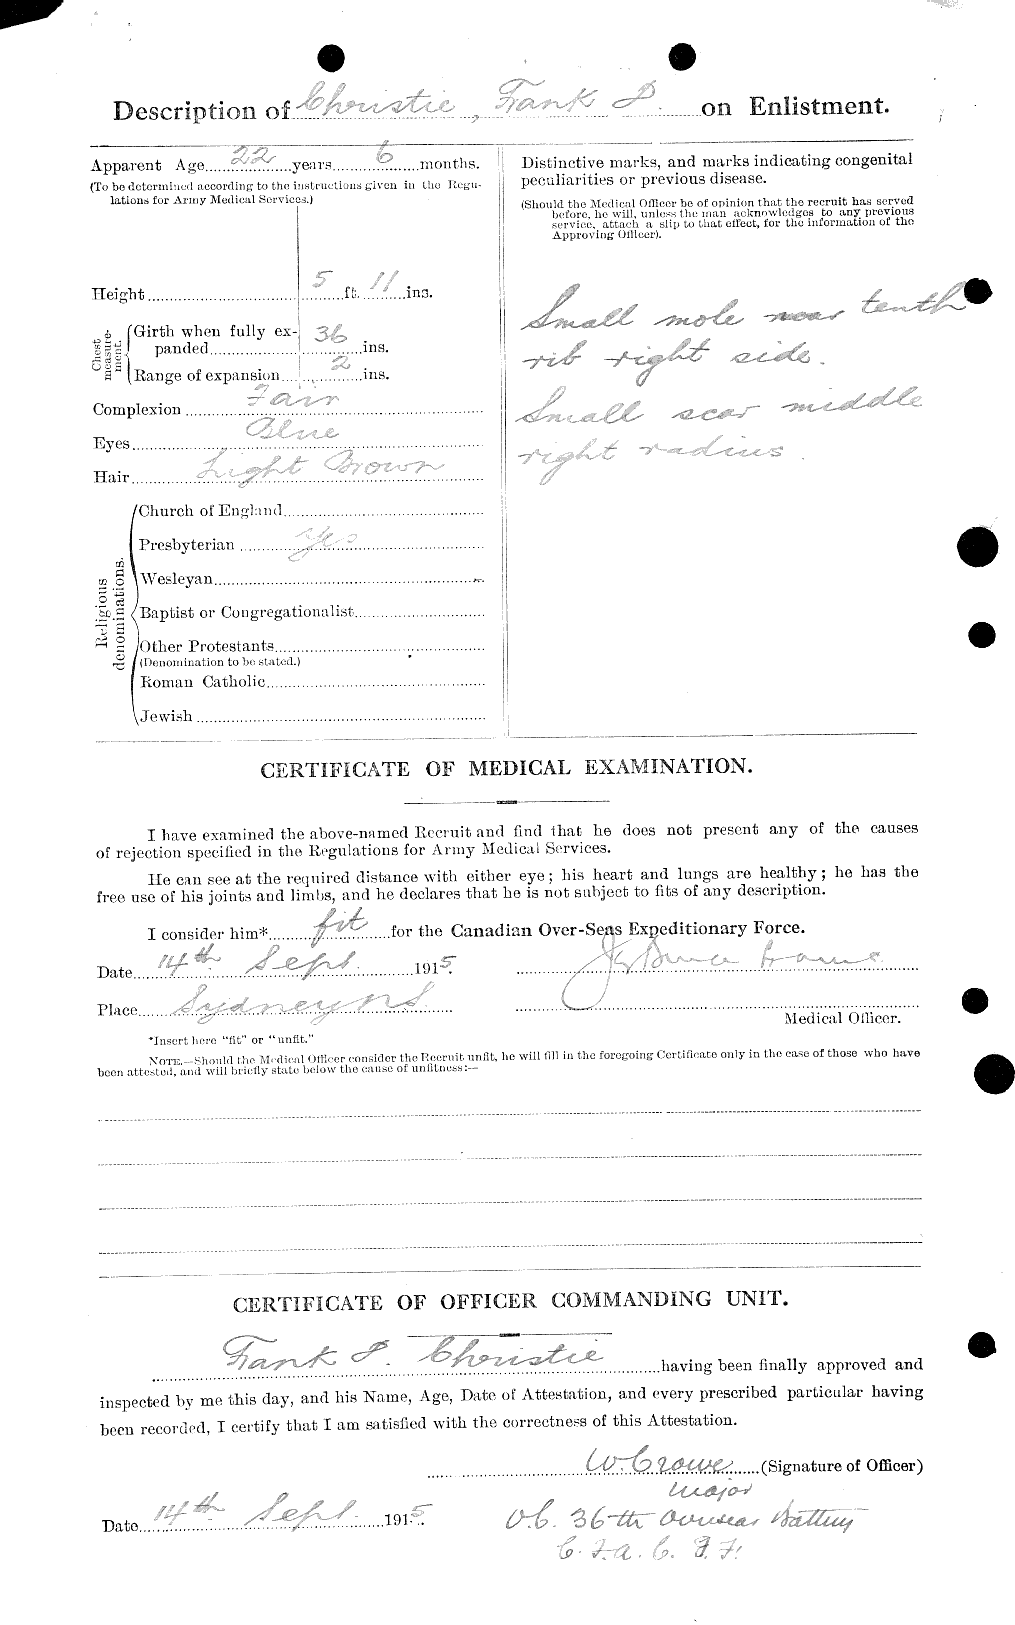 Personnel Records of the First World War - CEF 021926b